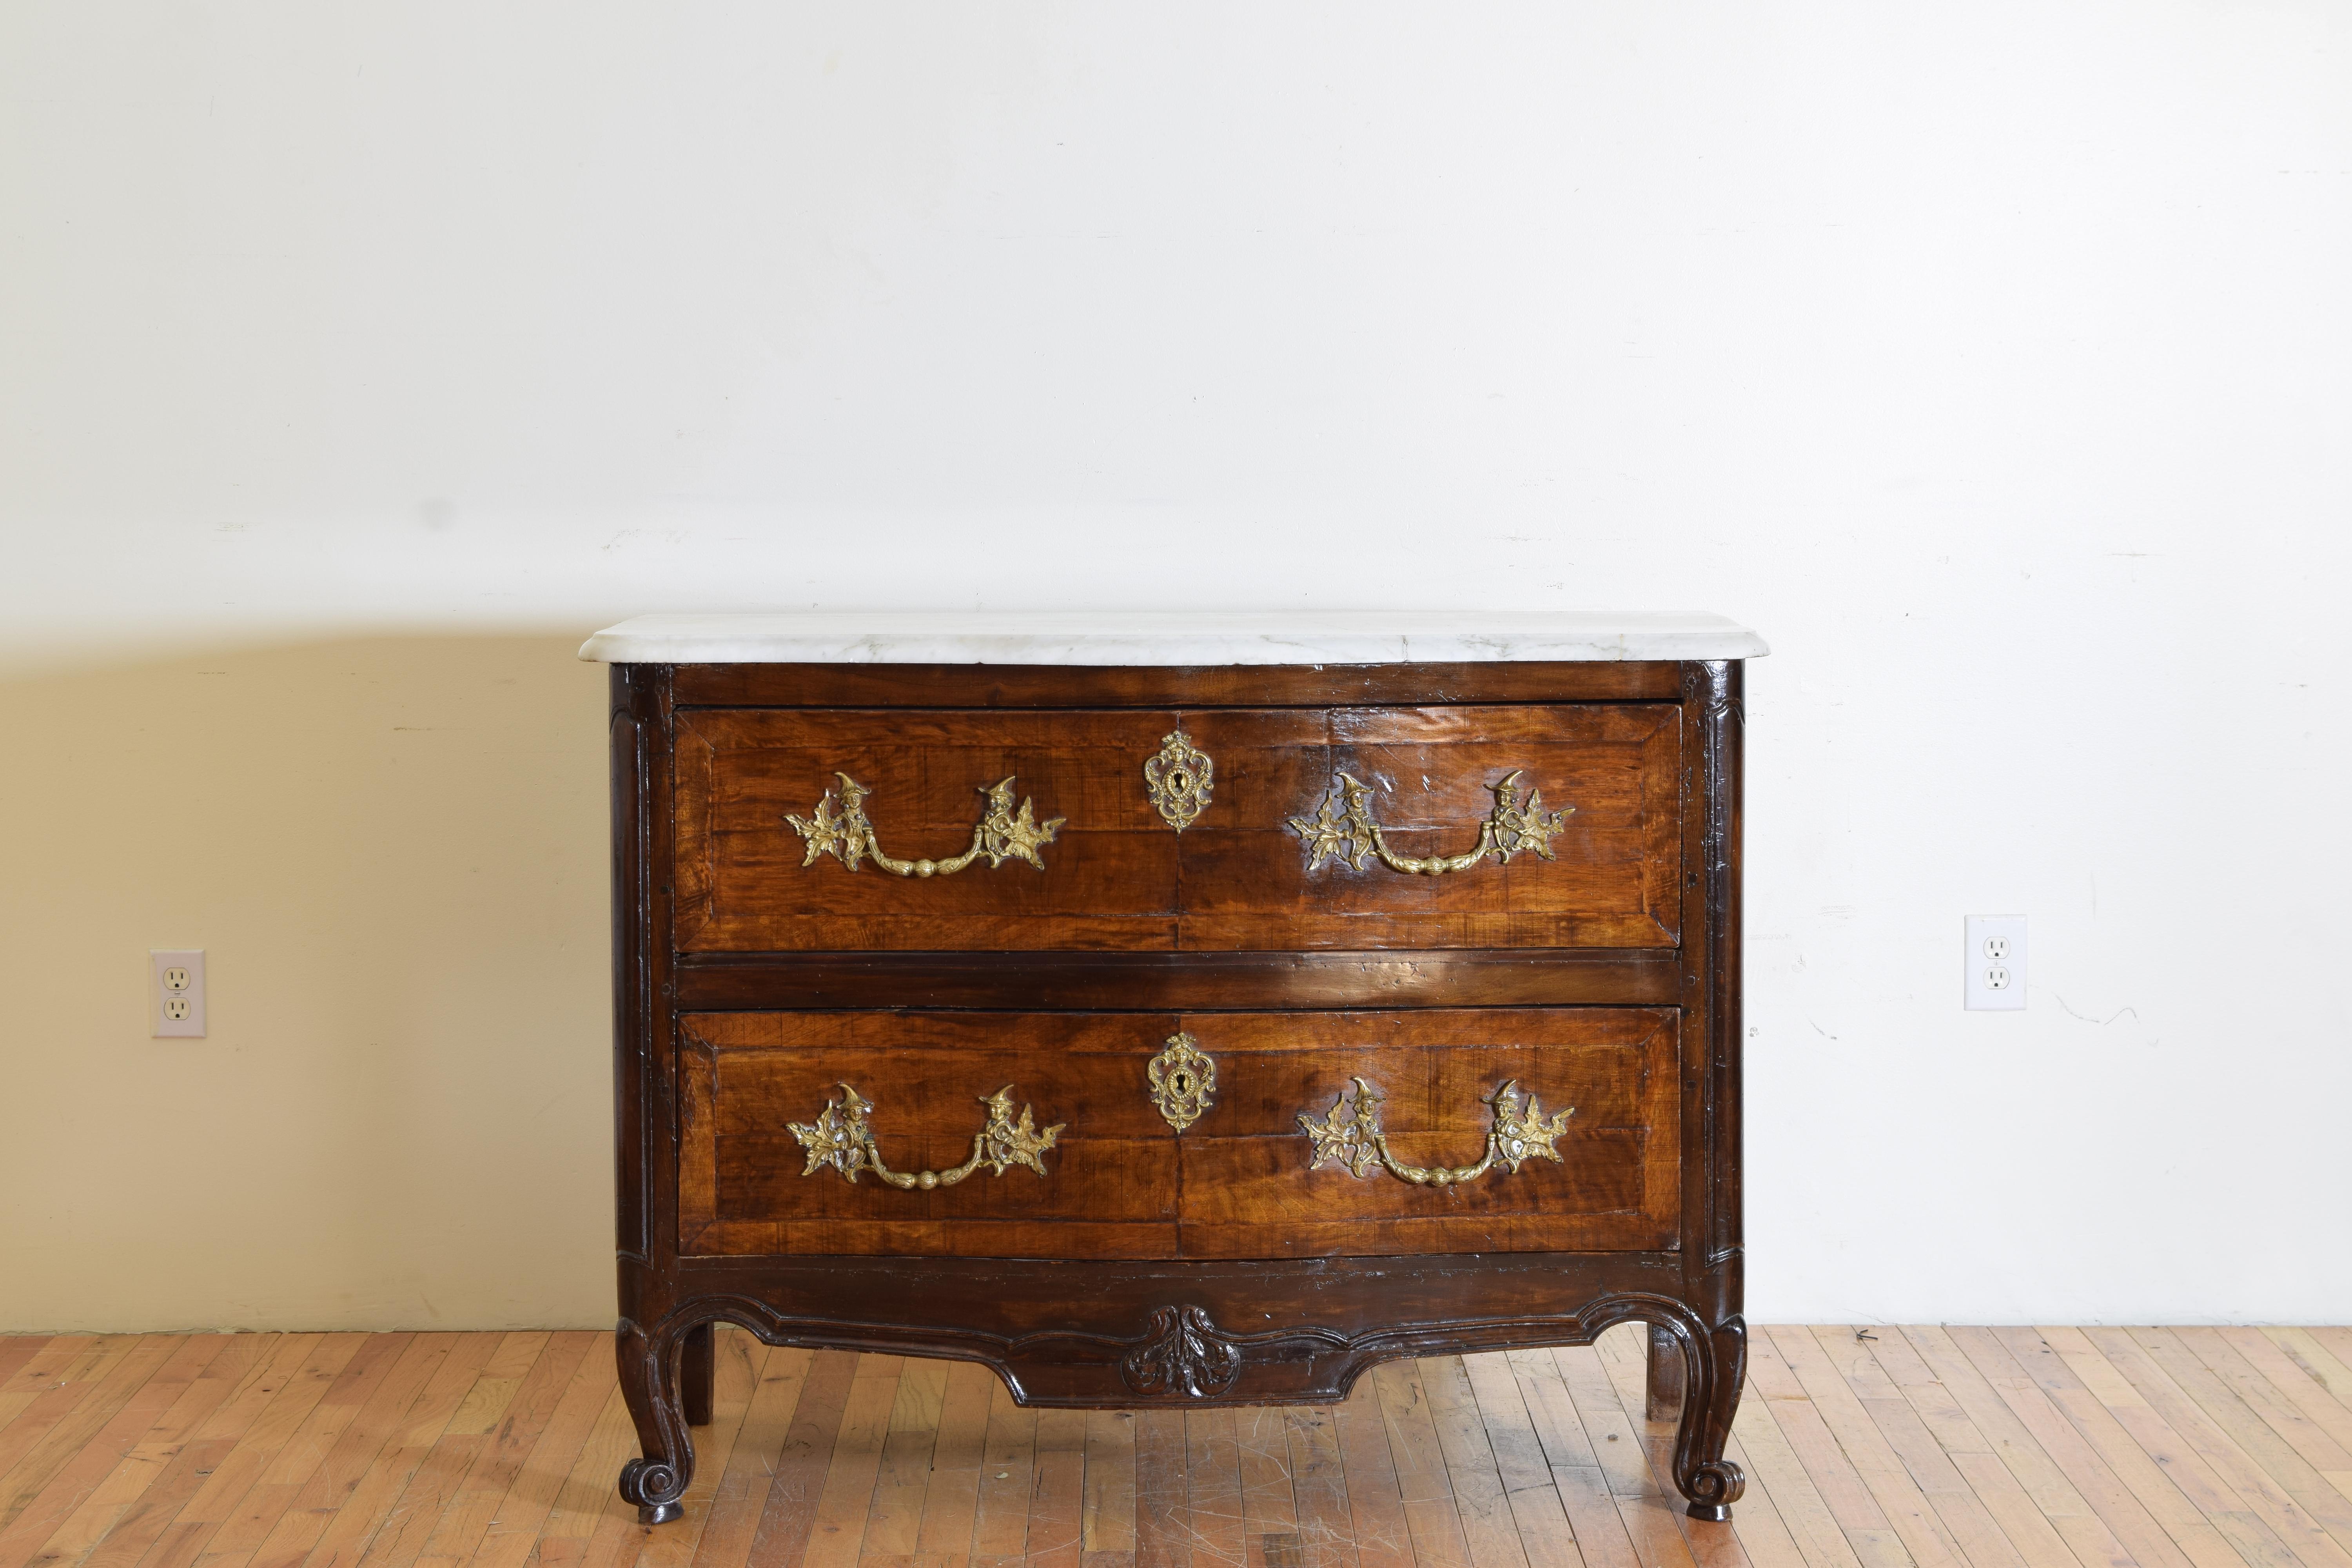 this highly stylized two drawer commode is a fine example of the influence of the Chinoiserie style sweeping Europe in the 18th century.  of serpentine shape and retaining its original marble top this commode is constructed of walnut with the